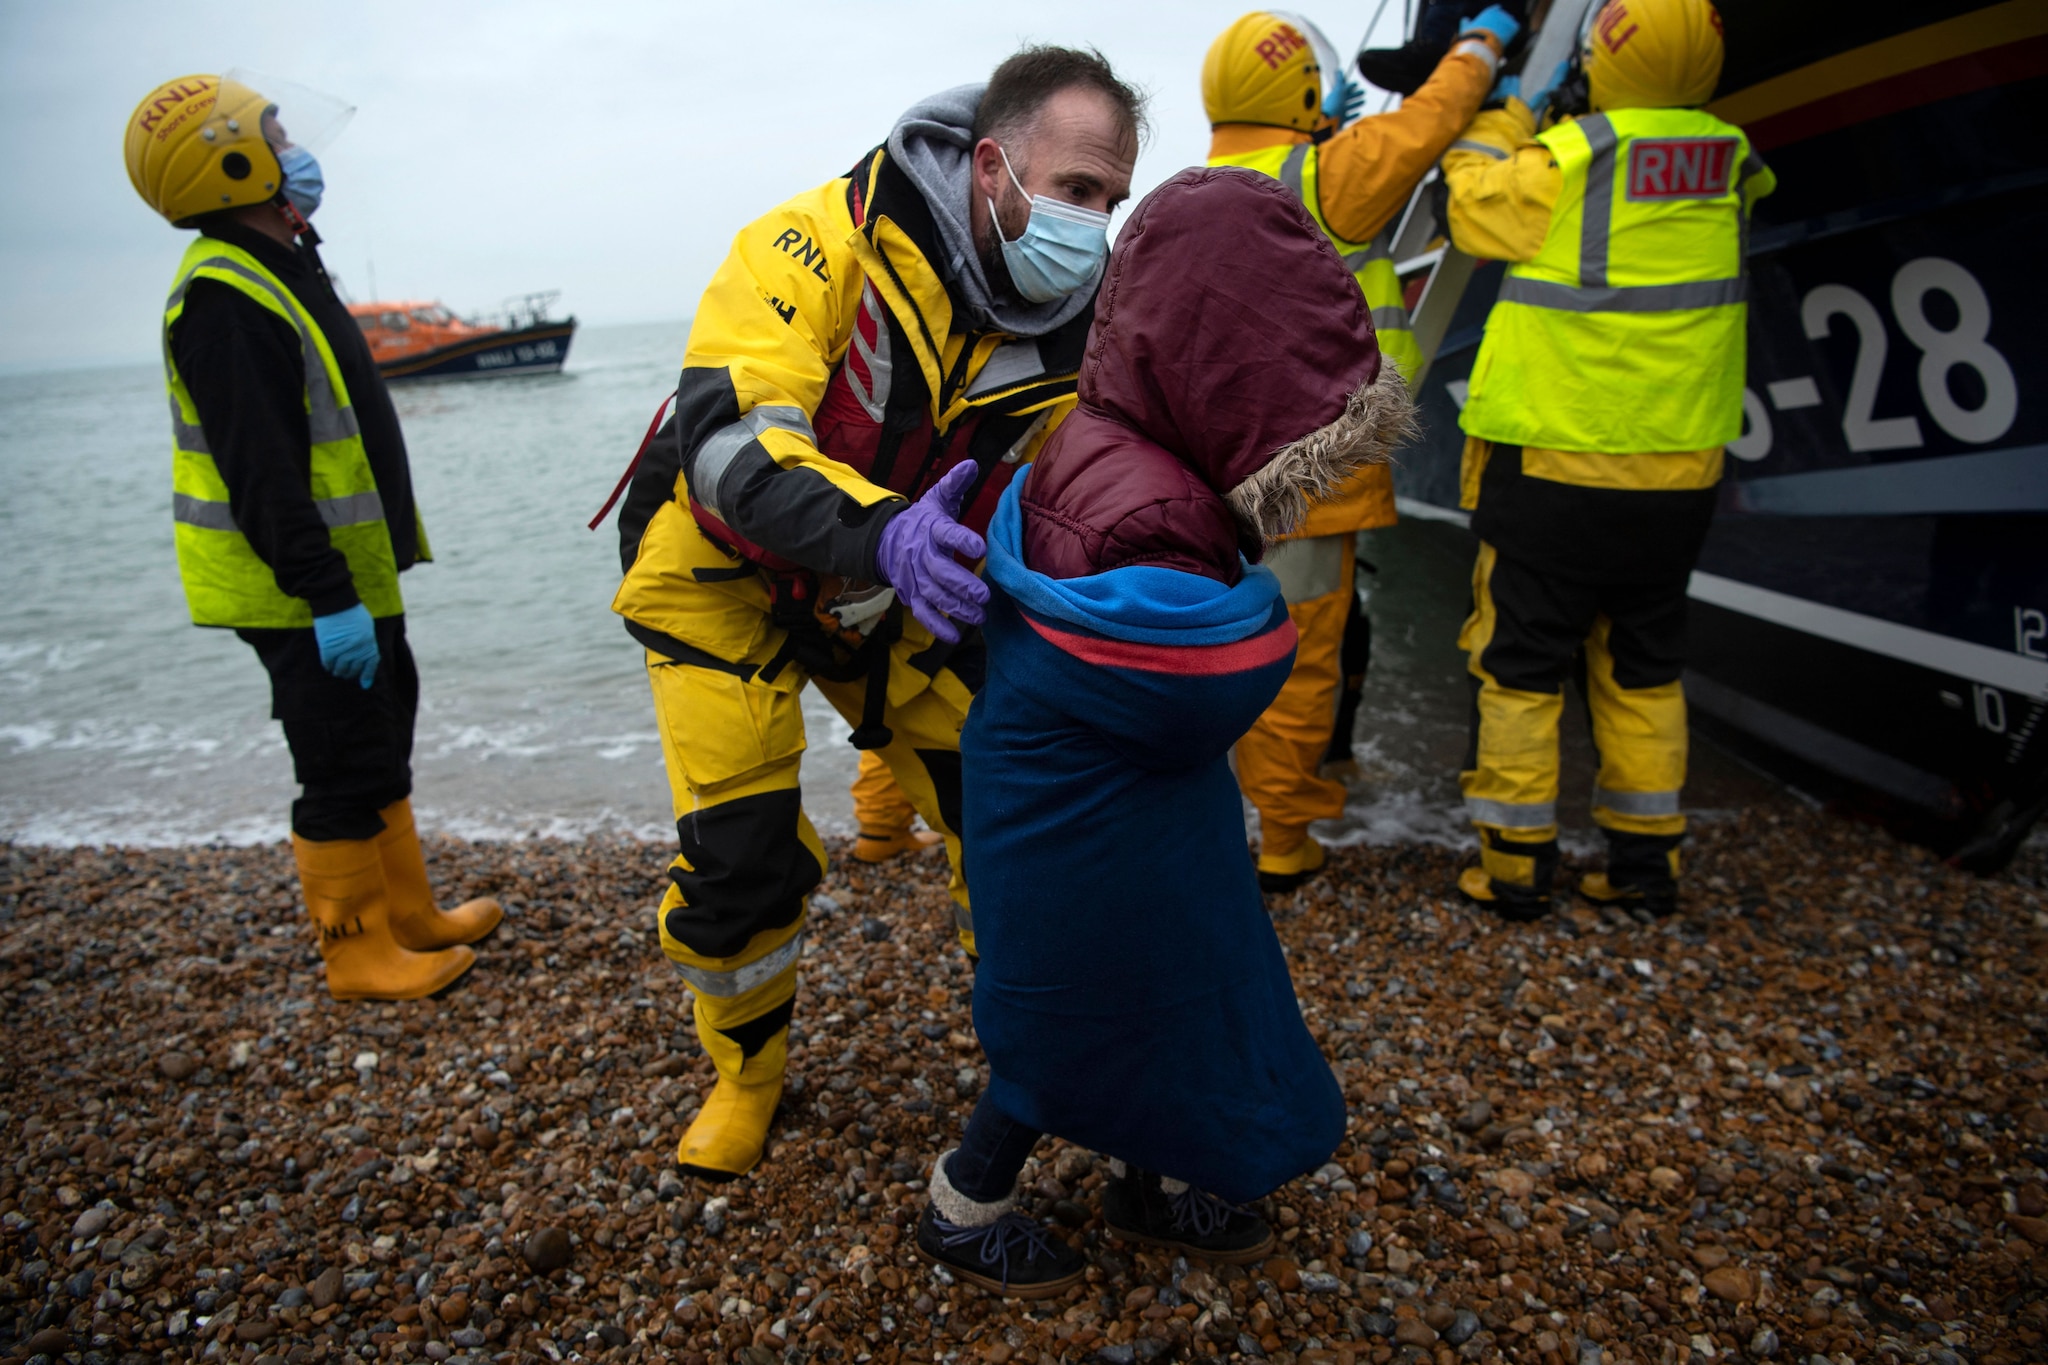 A child is helped ashore from a lifeboat at a beach in Dungeness, on the south-east coast of England, on 24 November, 2021.